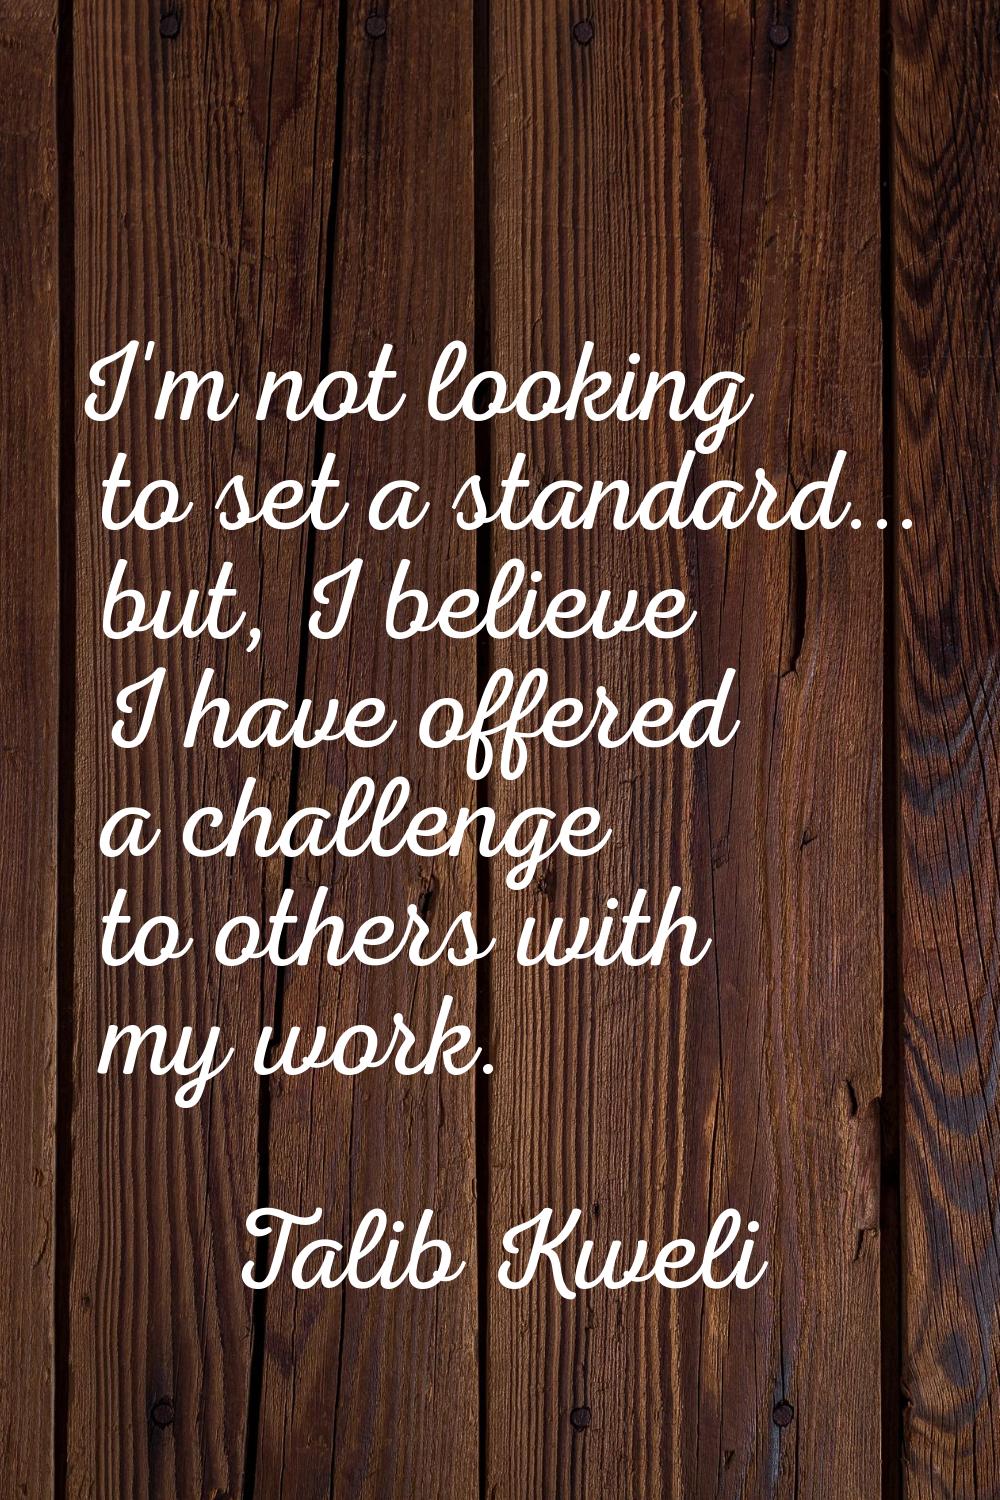 I'm not looking to set a standard... but, I believe I have offered a challenge to others with my wo